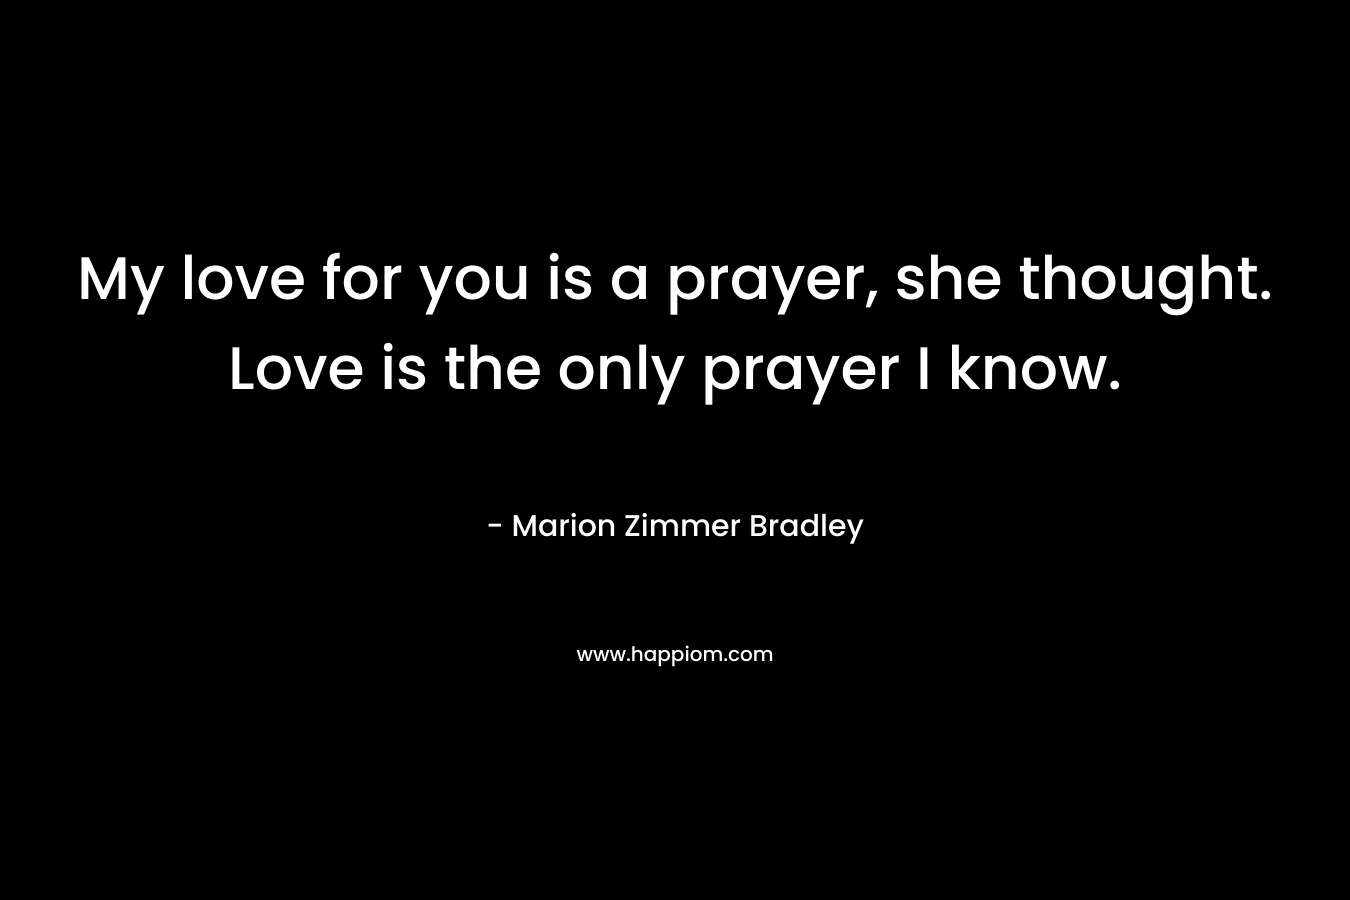 My love for you is a prayer, she thought. Love is the only prayer I know.